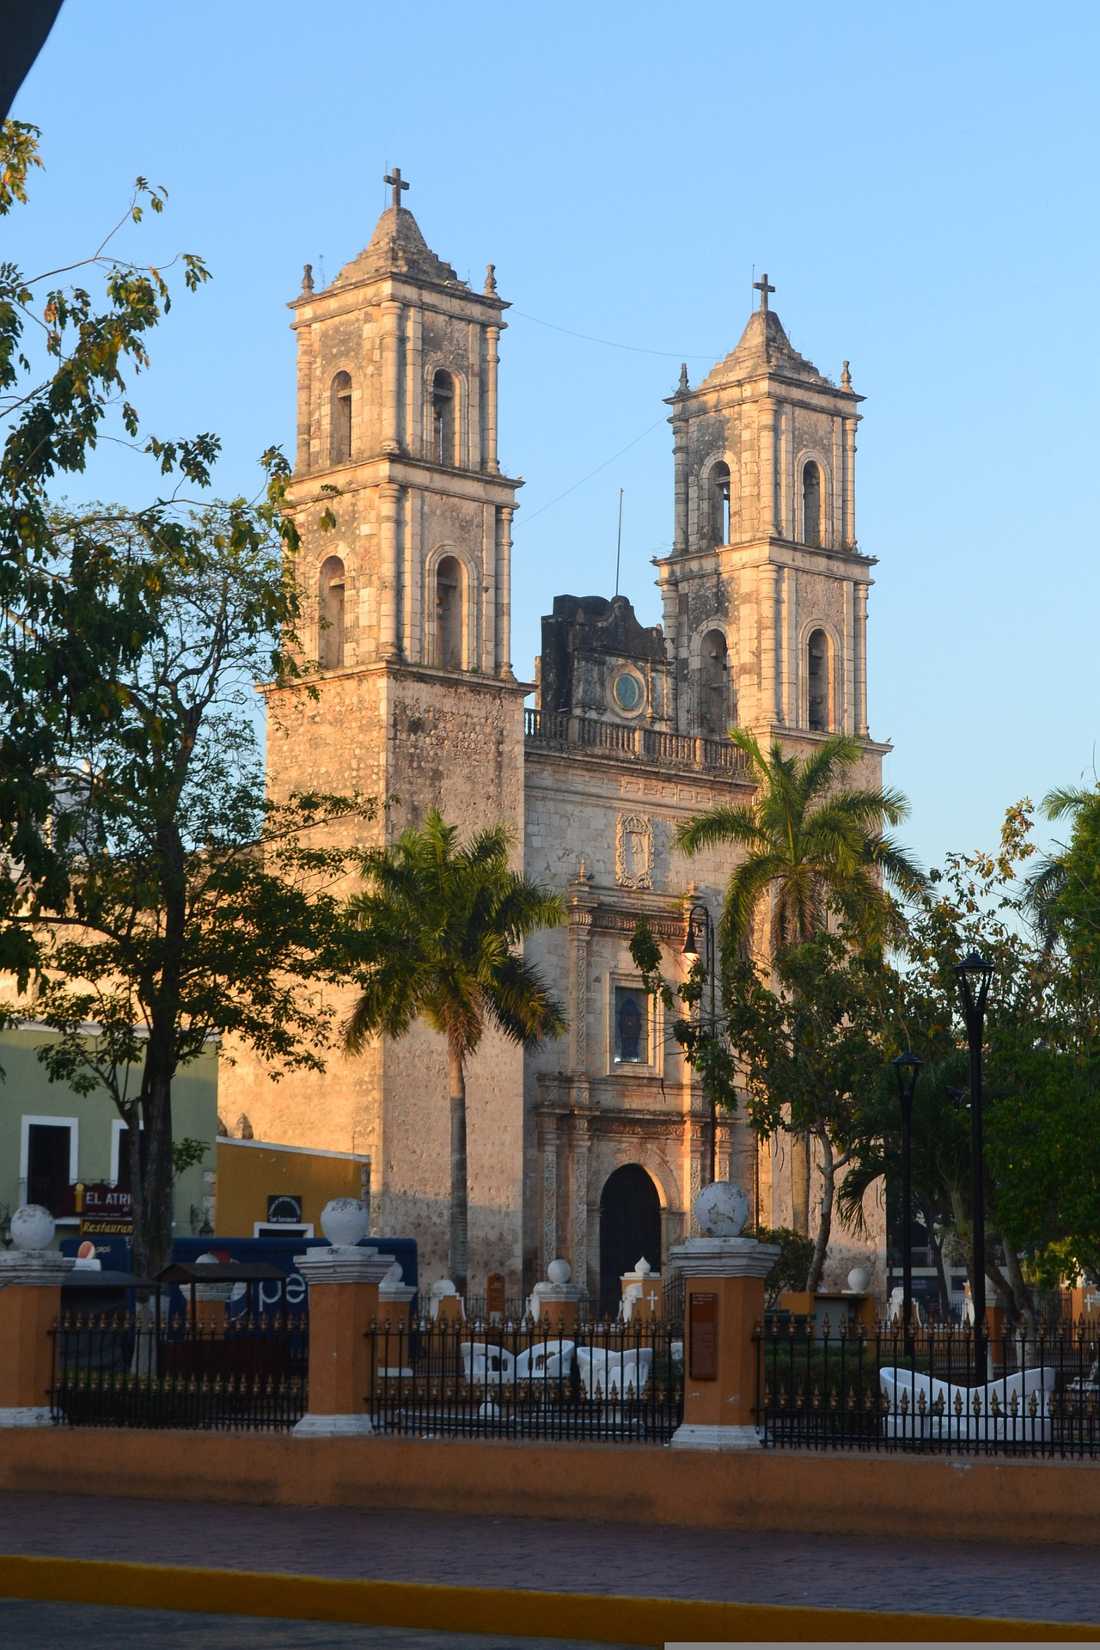 Valladolid is a must add to your Yucatan Itinerary